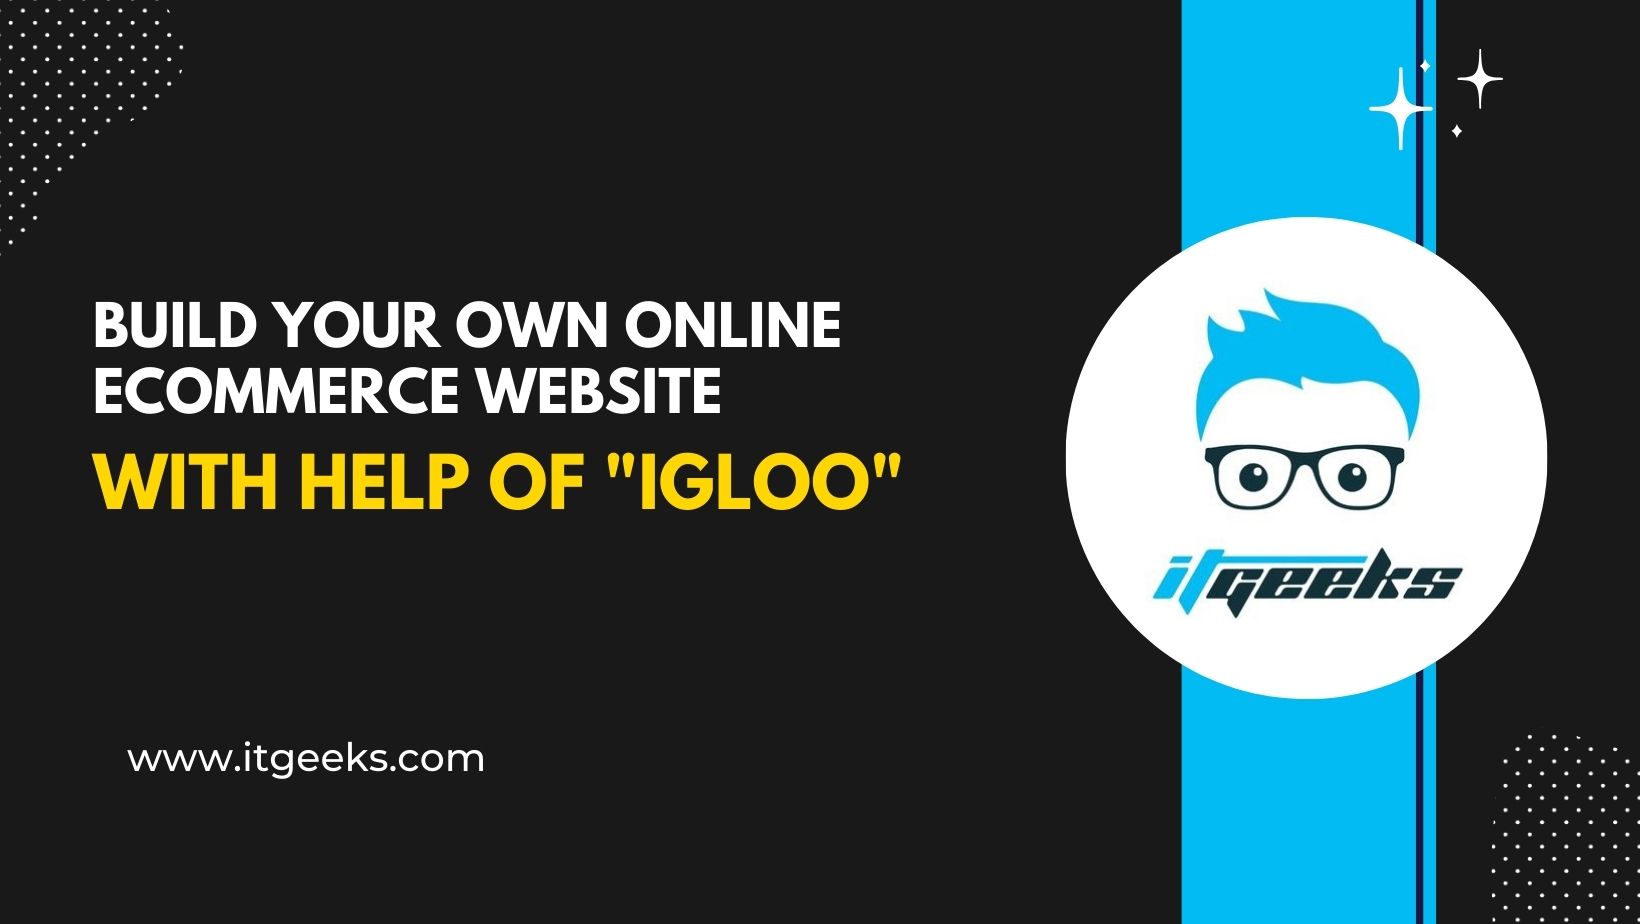 Build your own online ecommerce website with help of “Igloo”